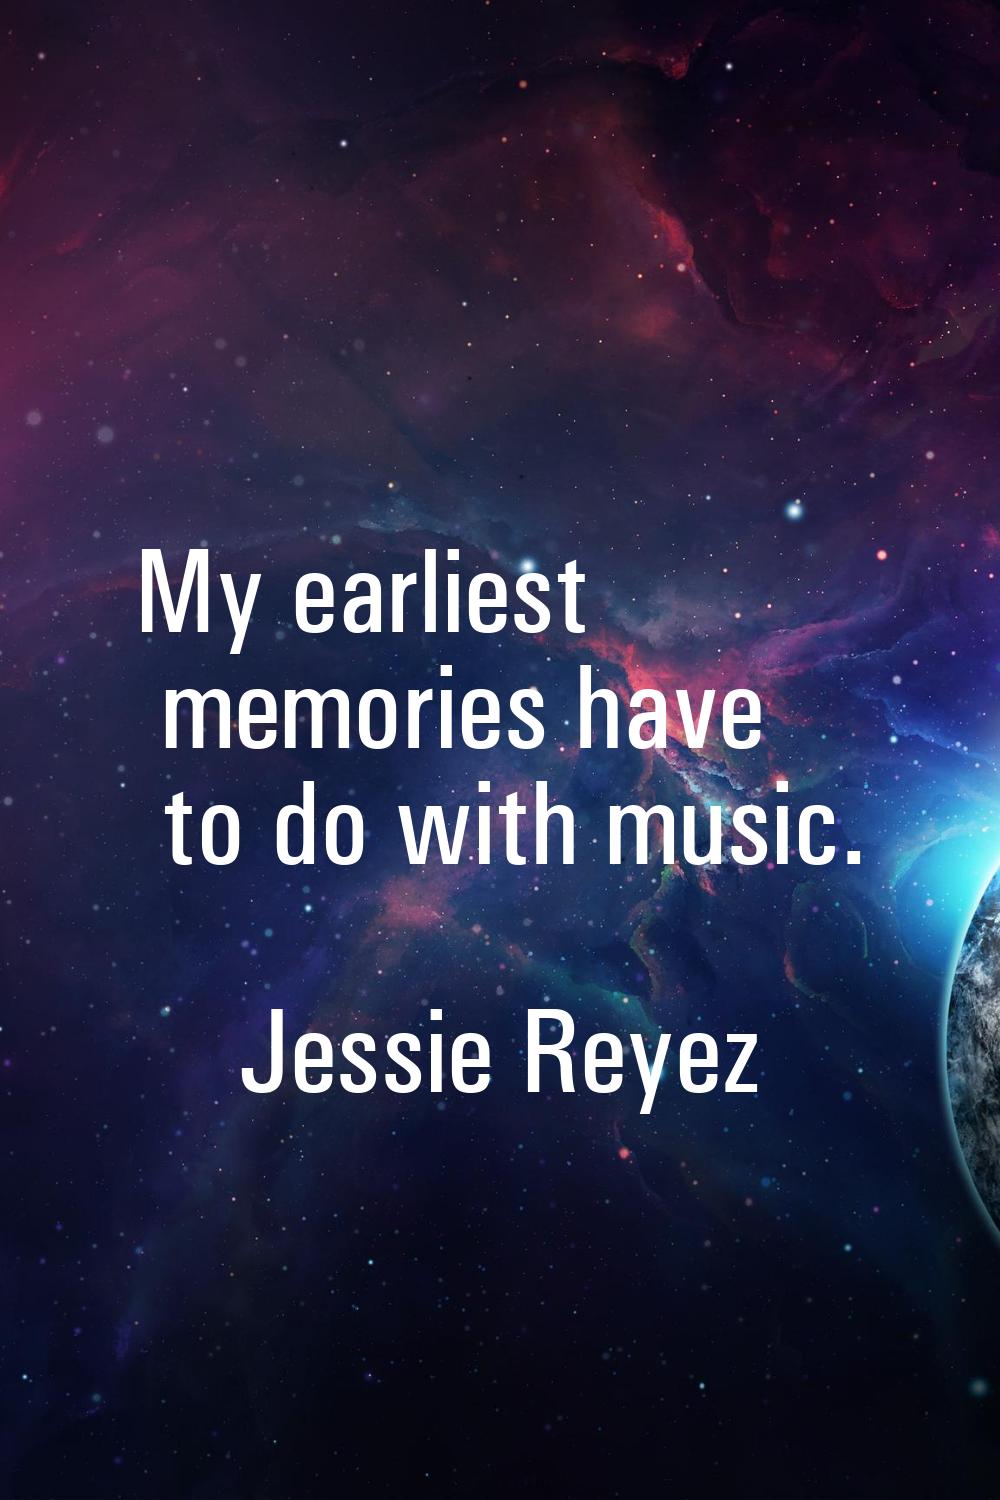 My earliest memories have to do with music.